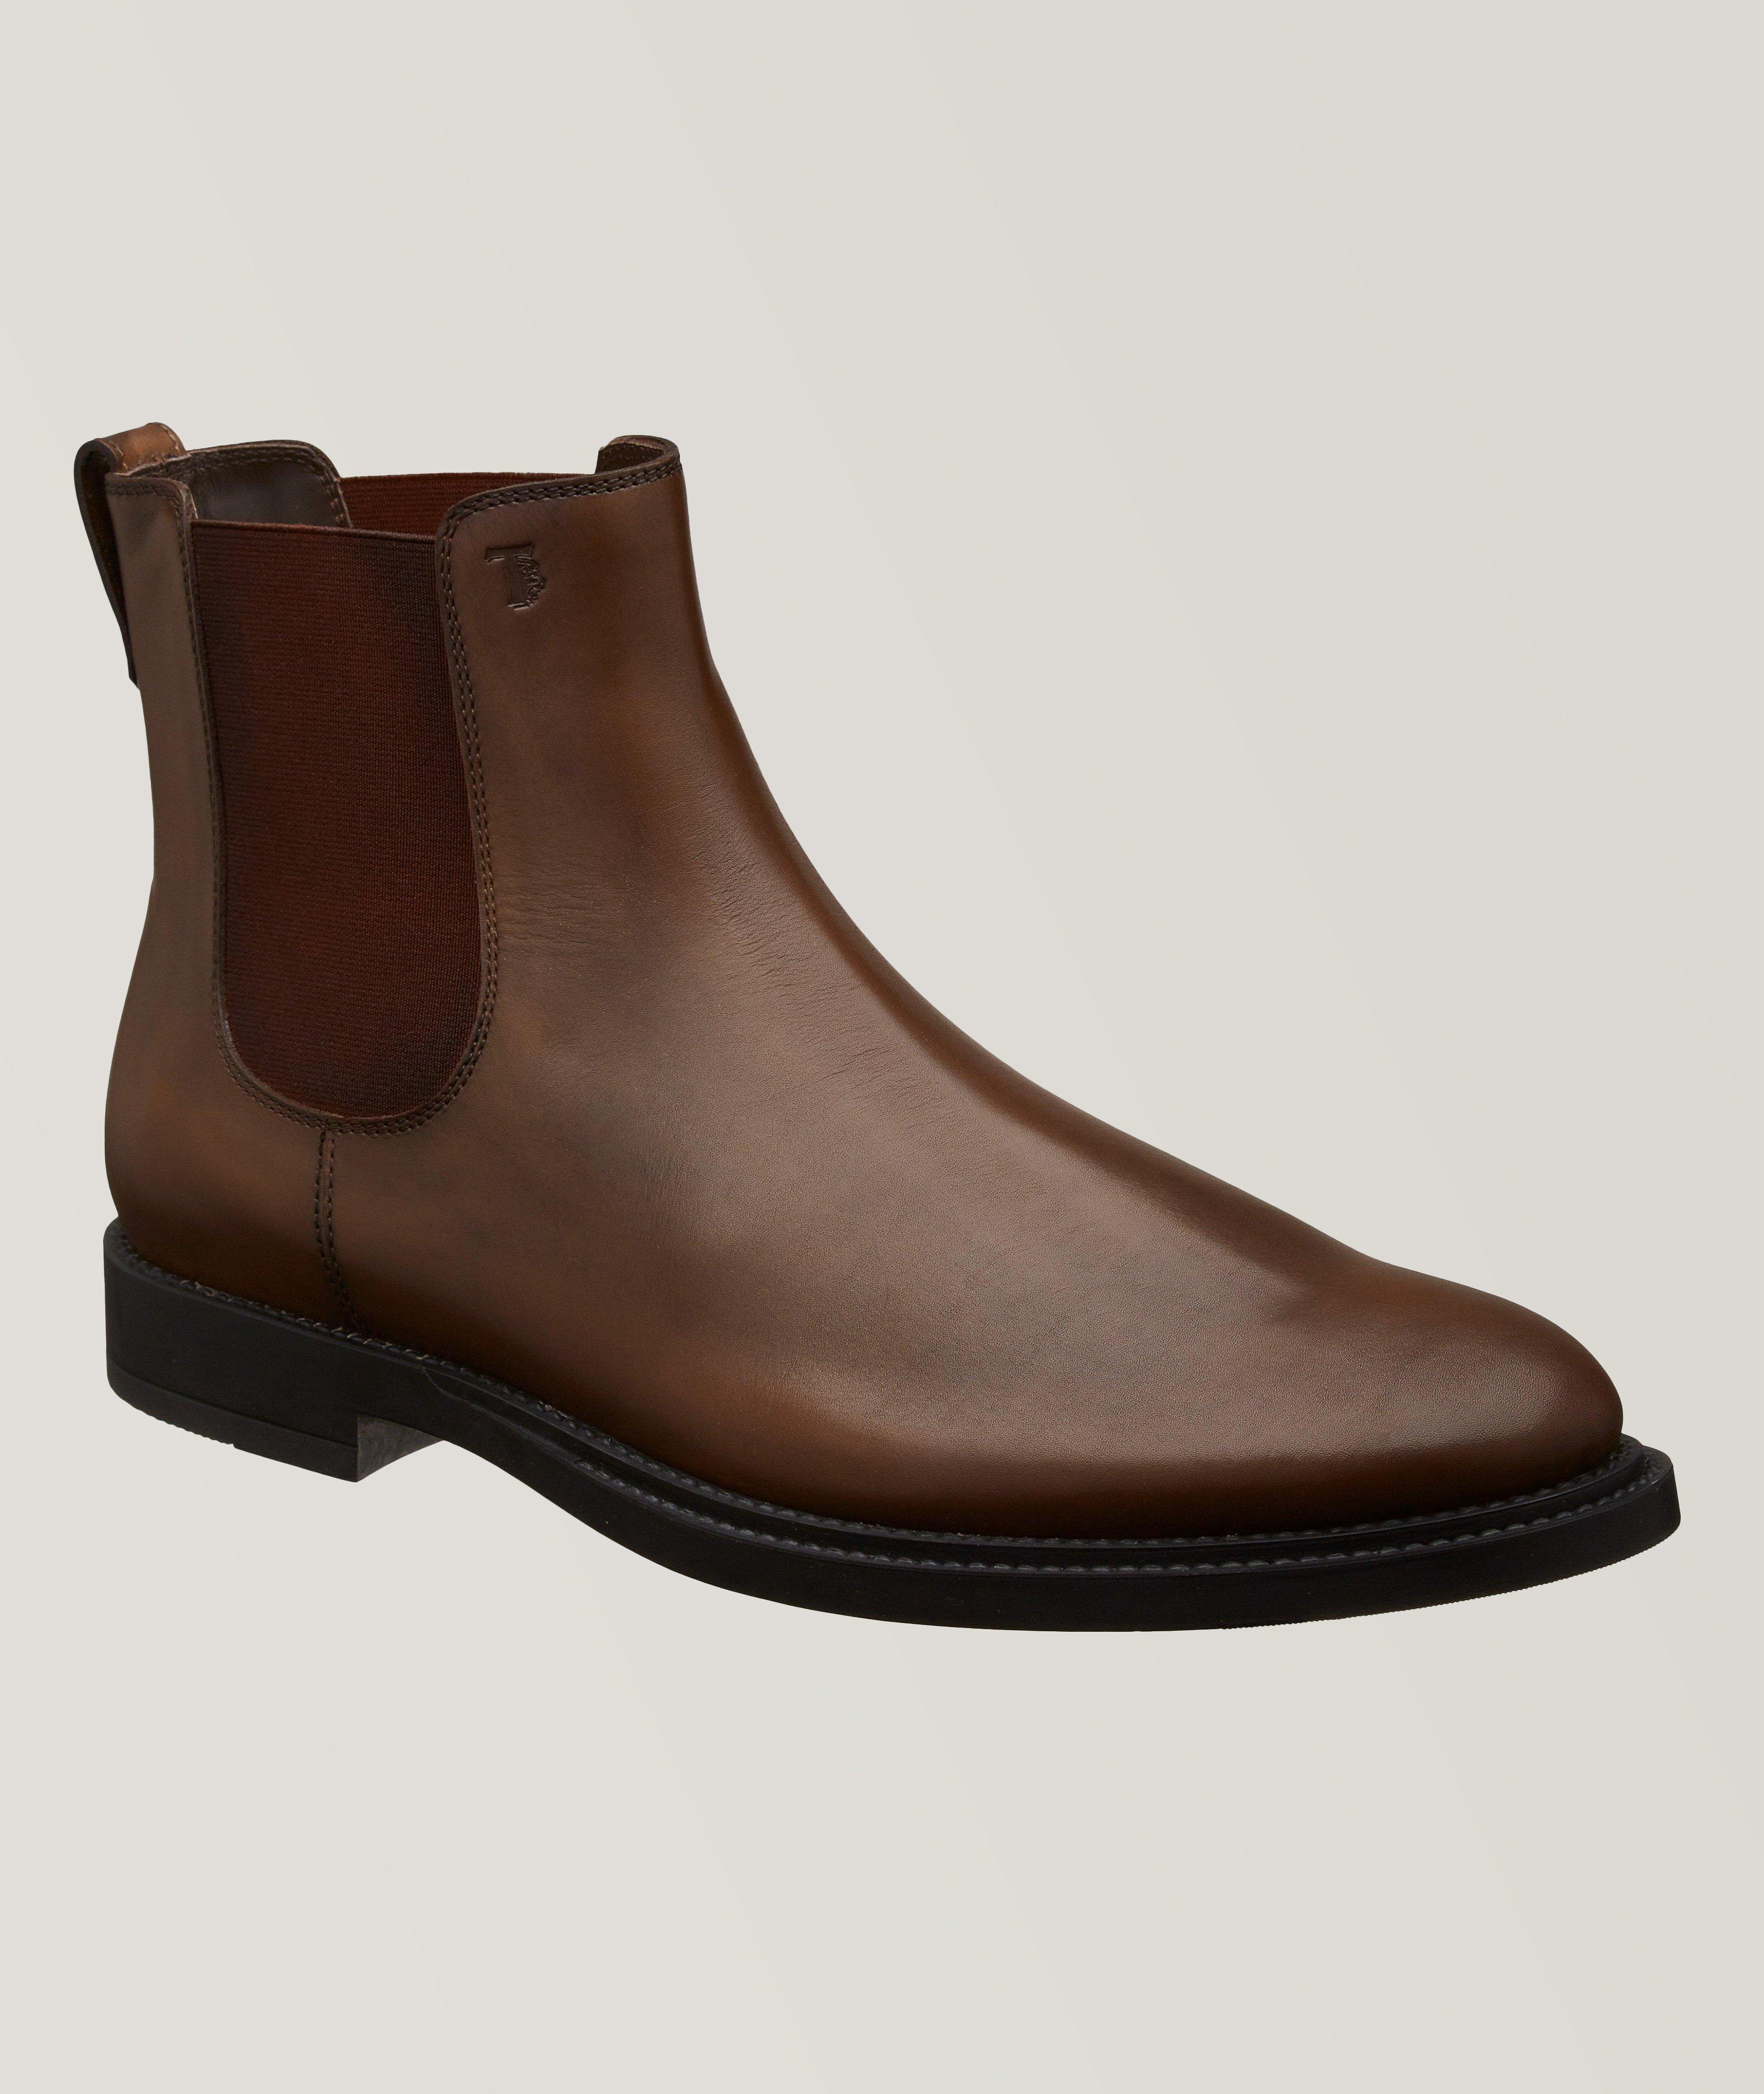 Brushed Leather Chelsea Boots image 0